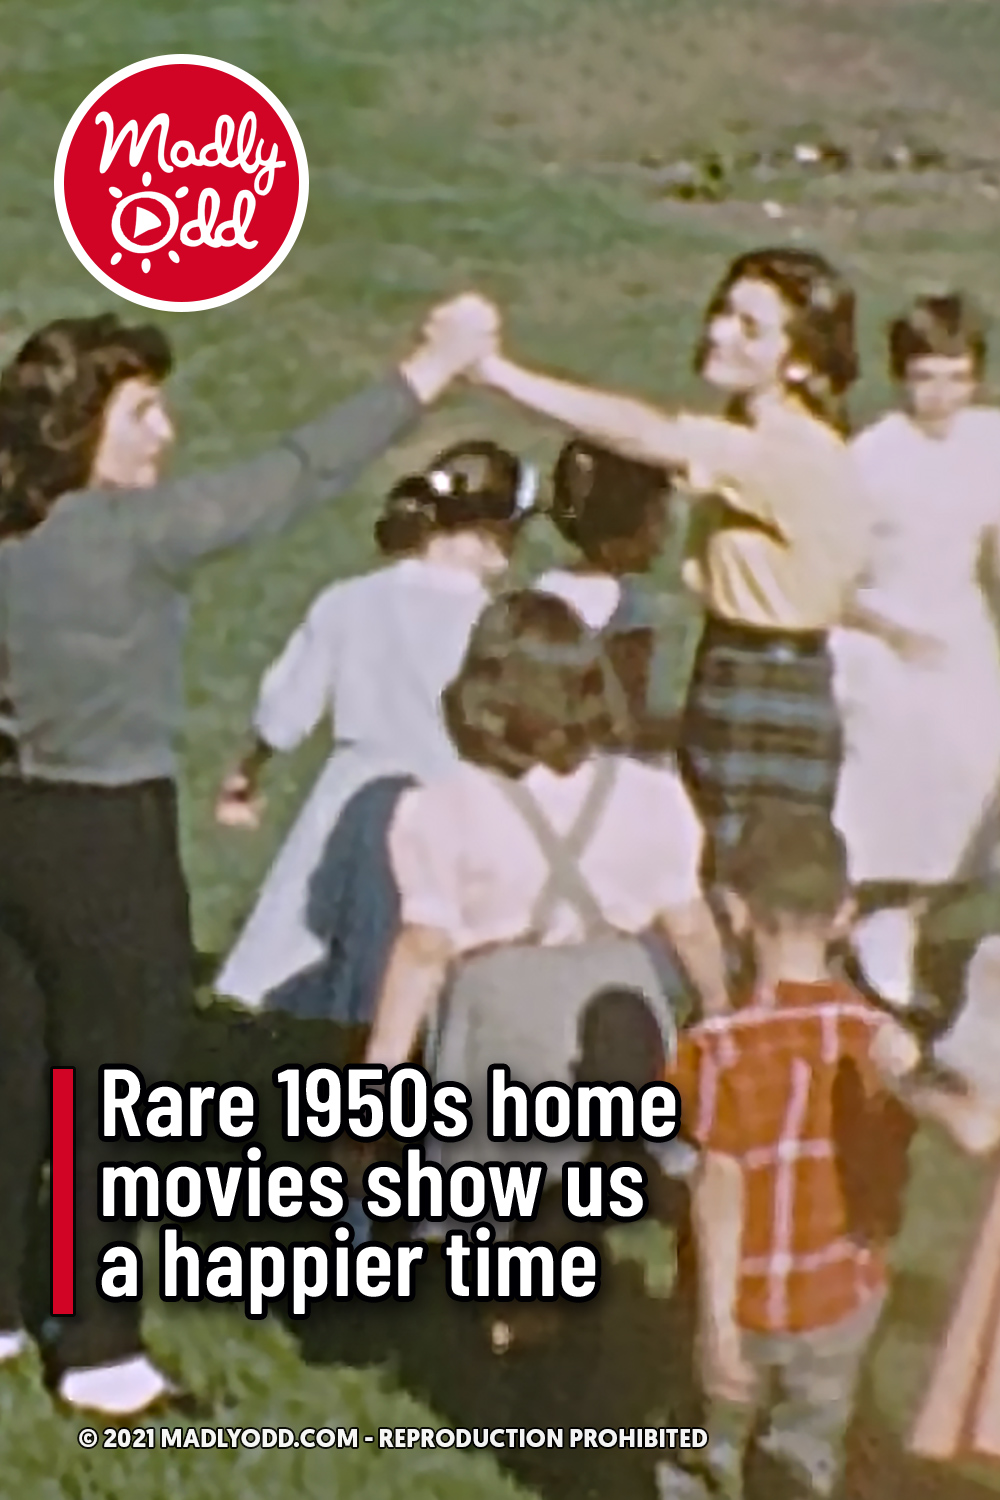 Rare 1950s home movies show us a happier time